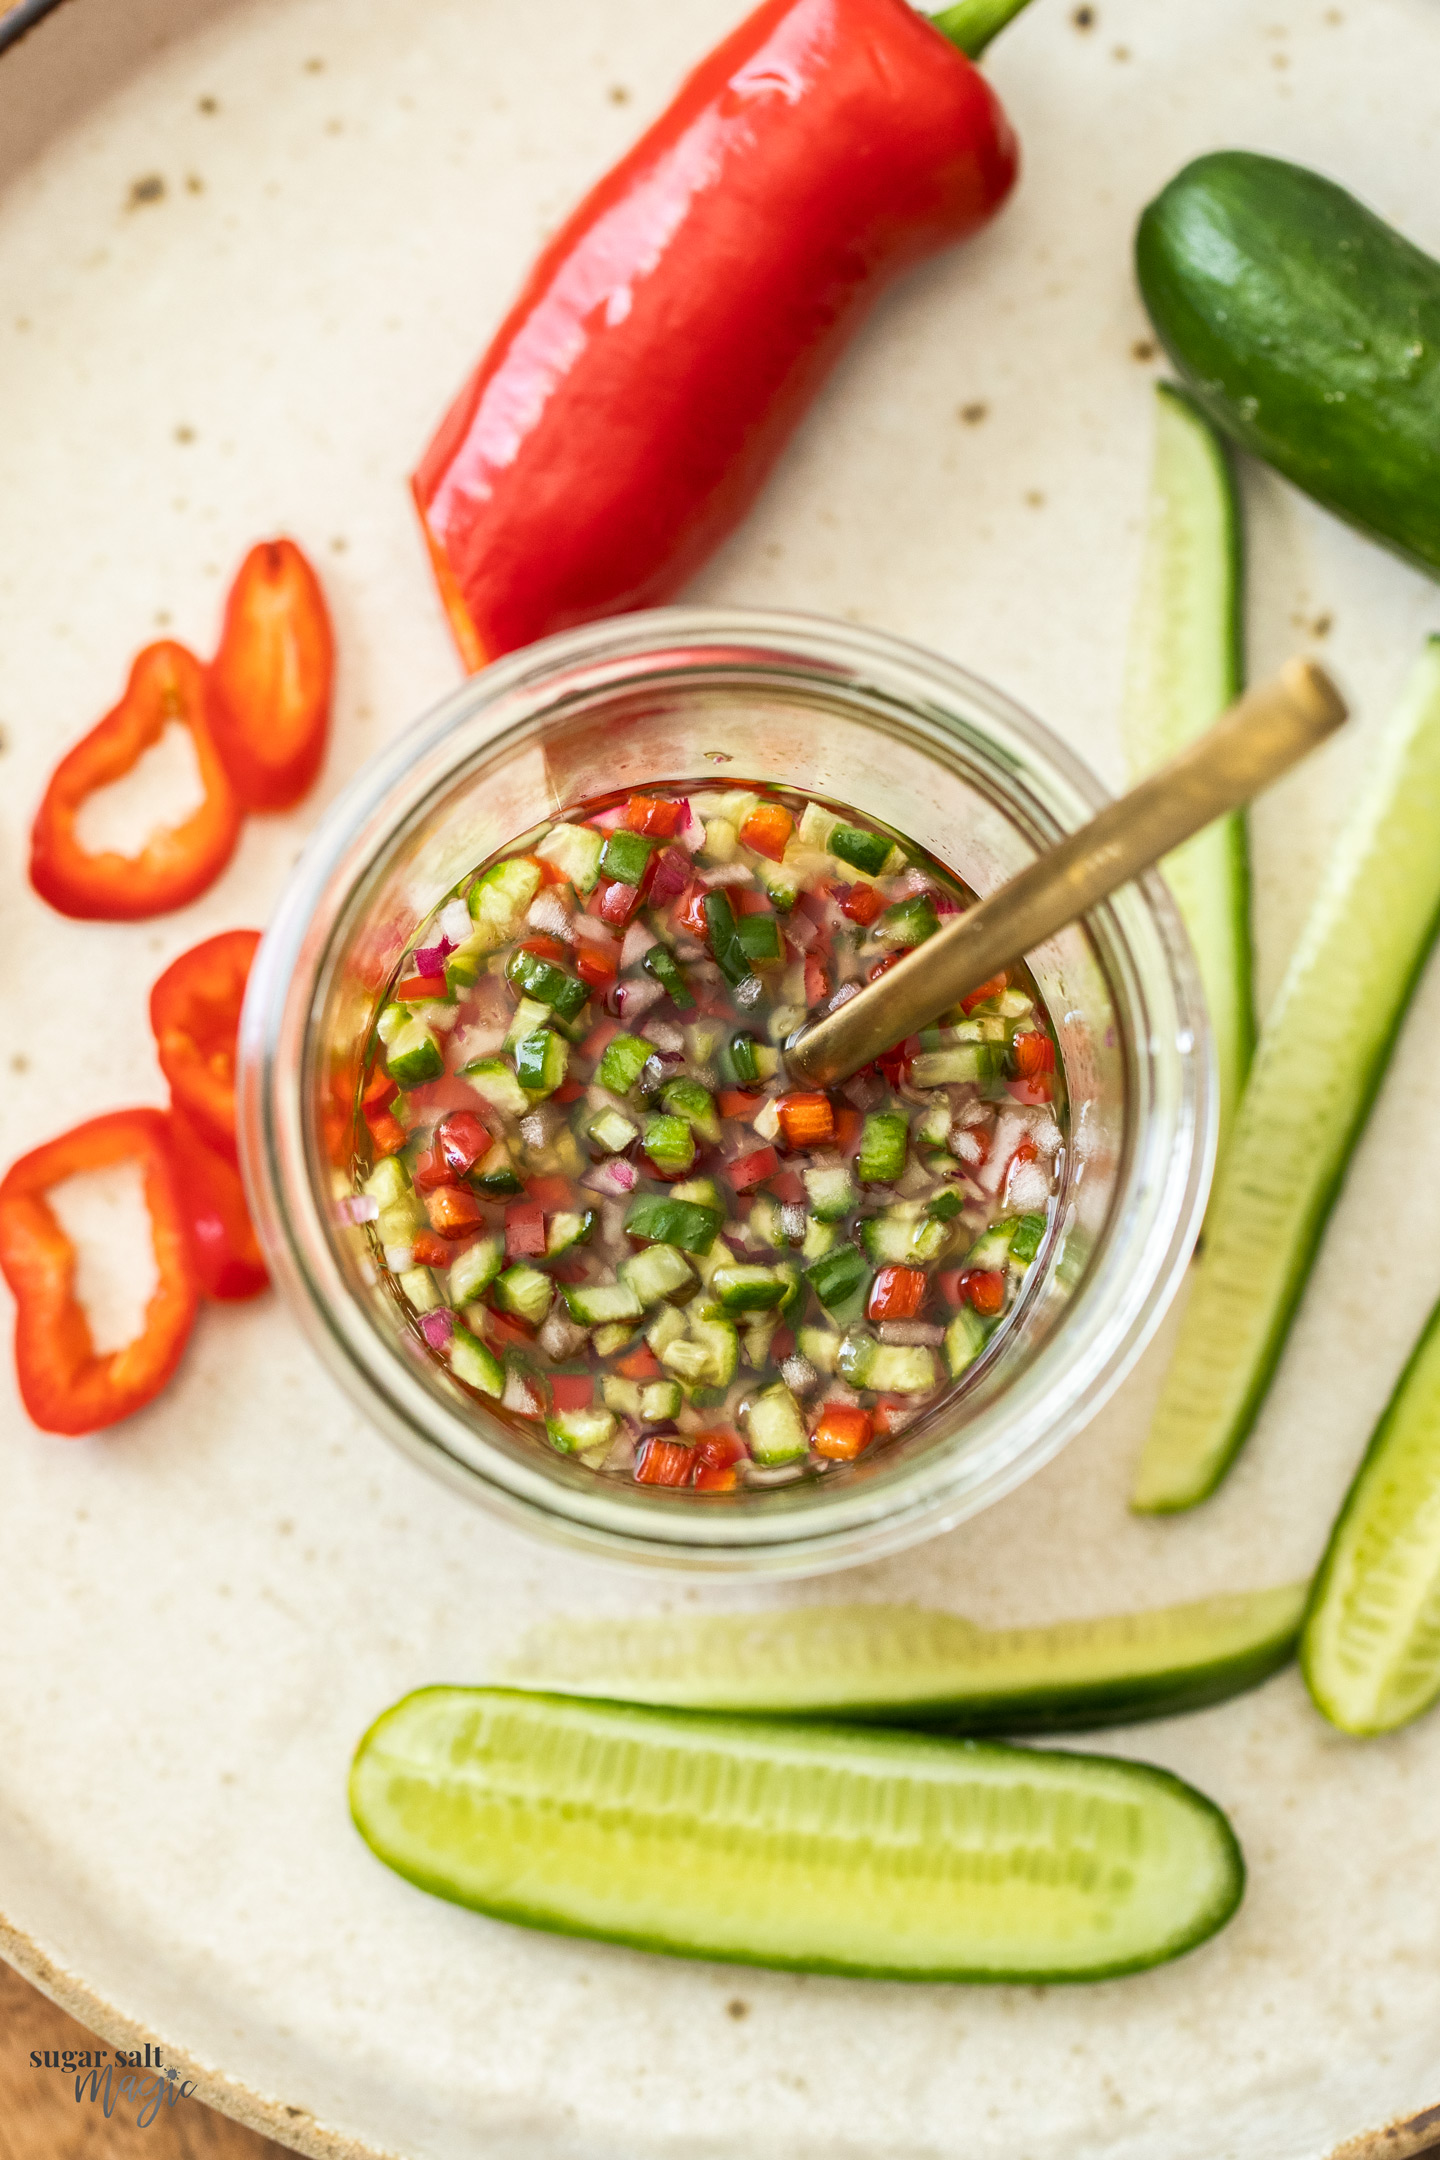 Top down view of a jar of Thai cucumber relish.